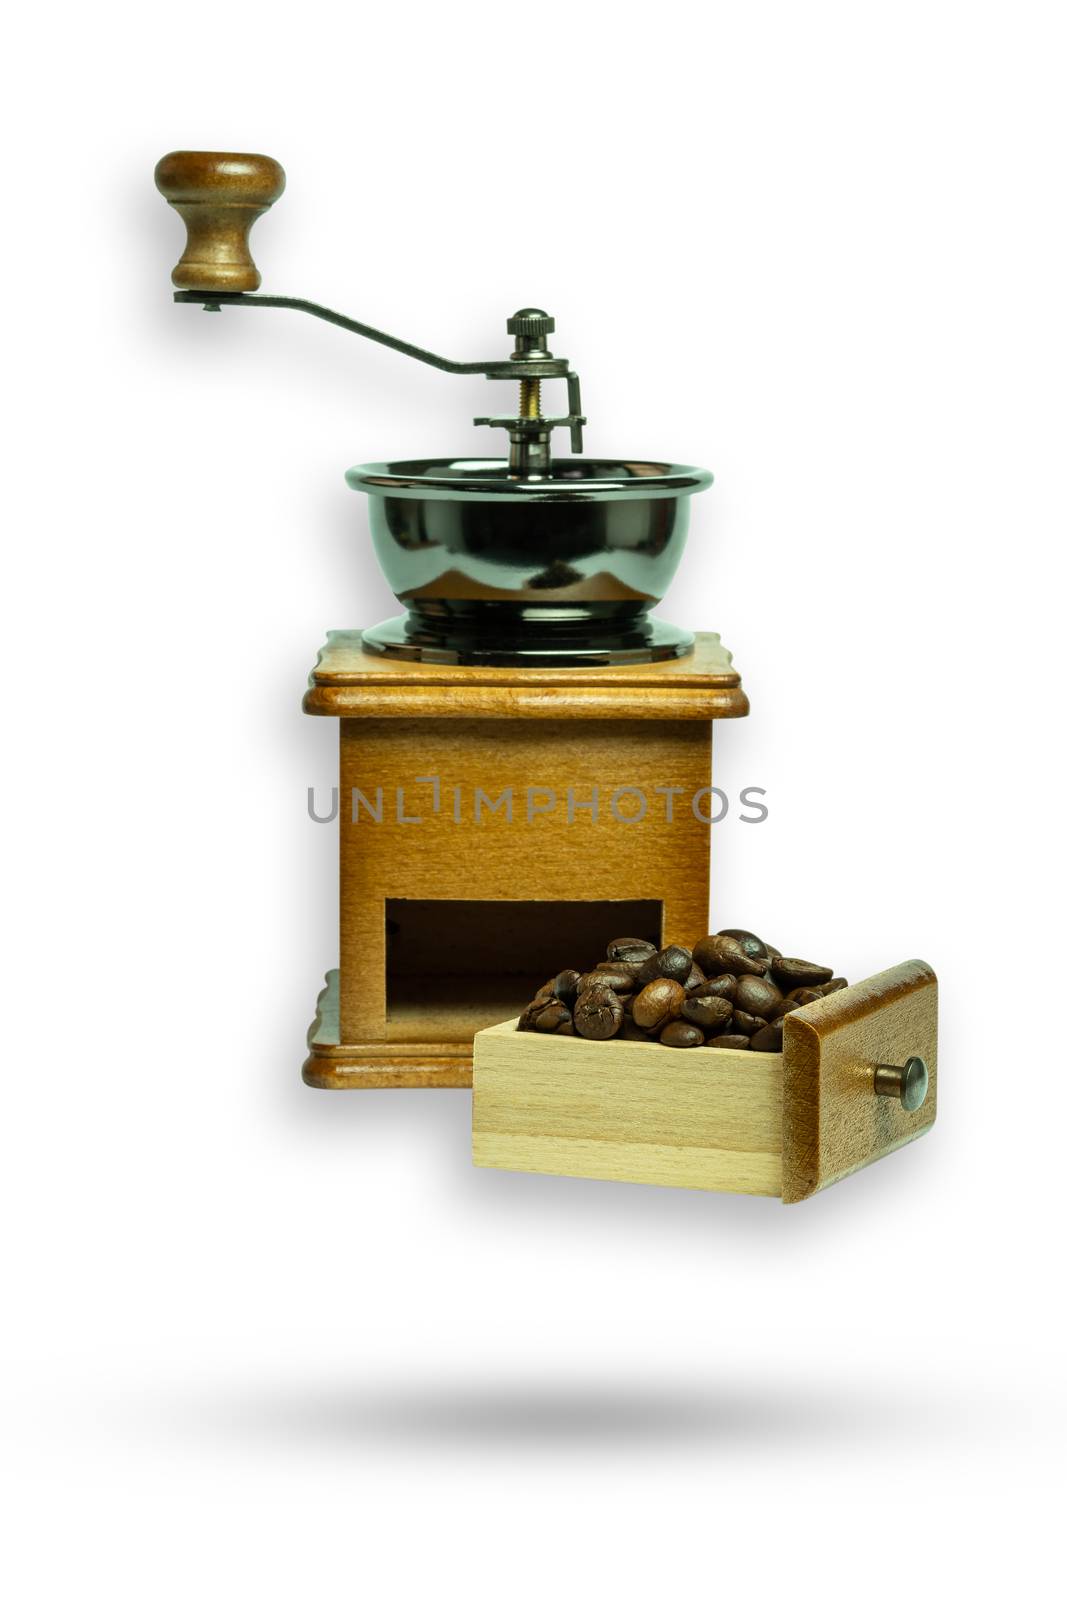 Hand grinder and coffee bean. Equipment for make a coffee. Isolate and clipping path on white background.